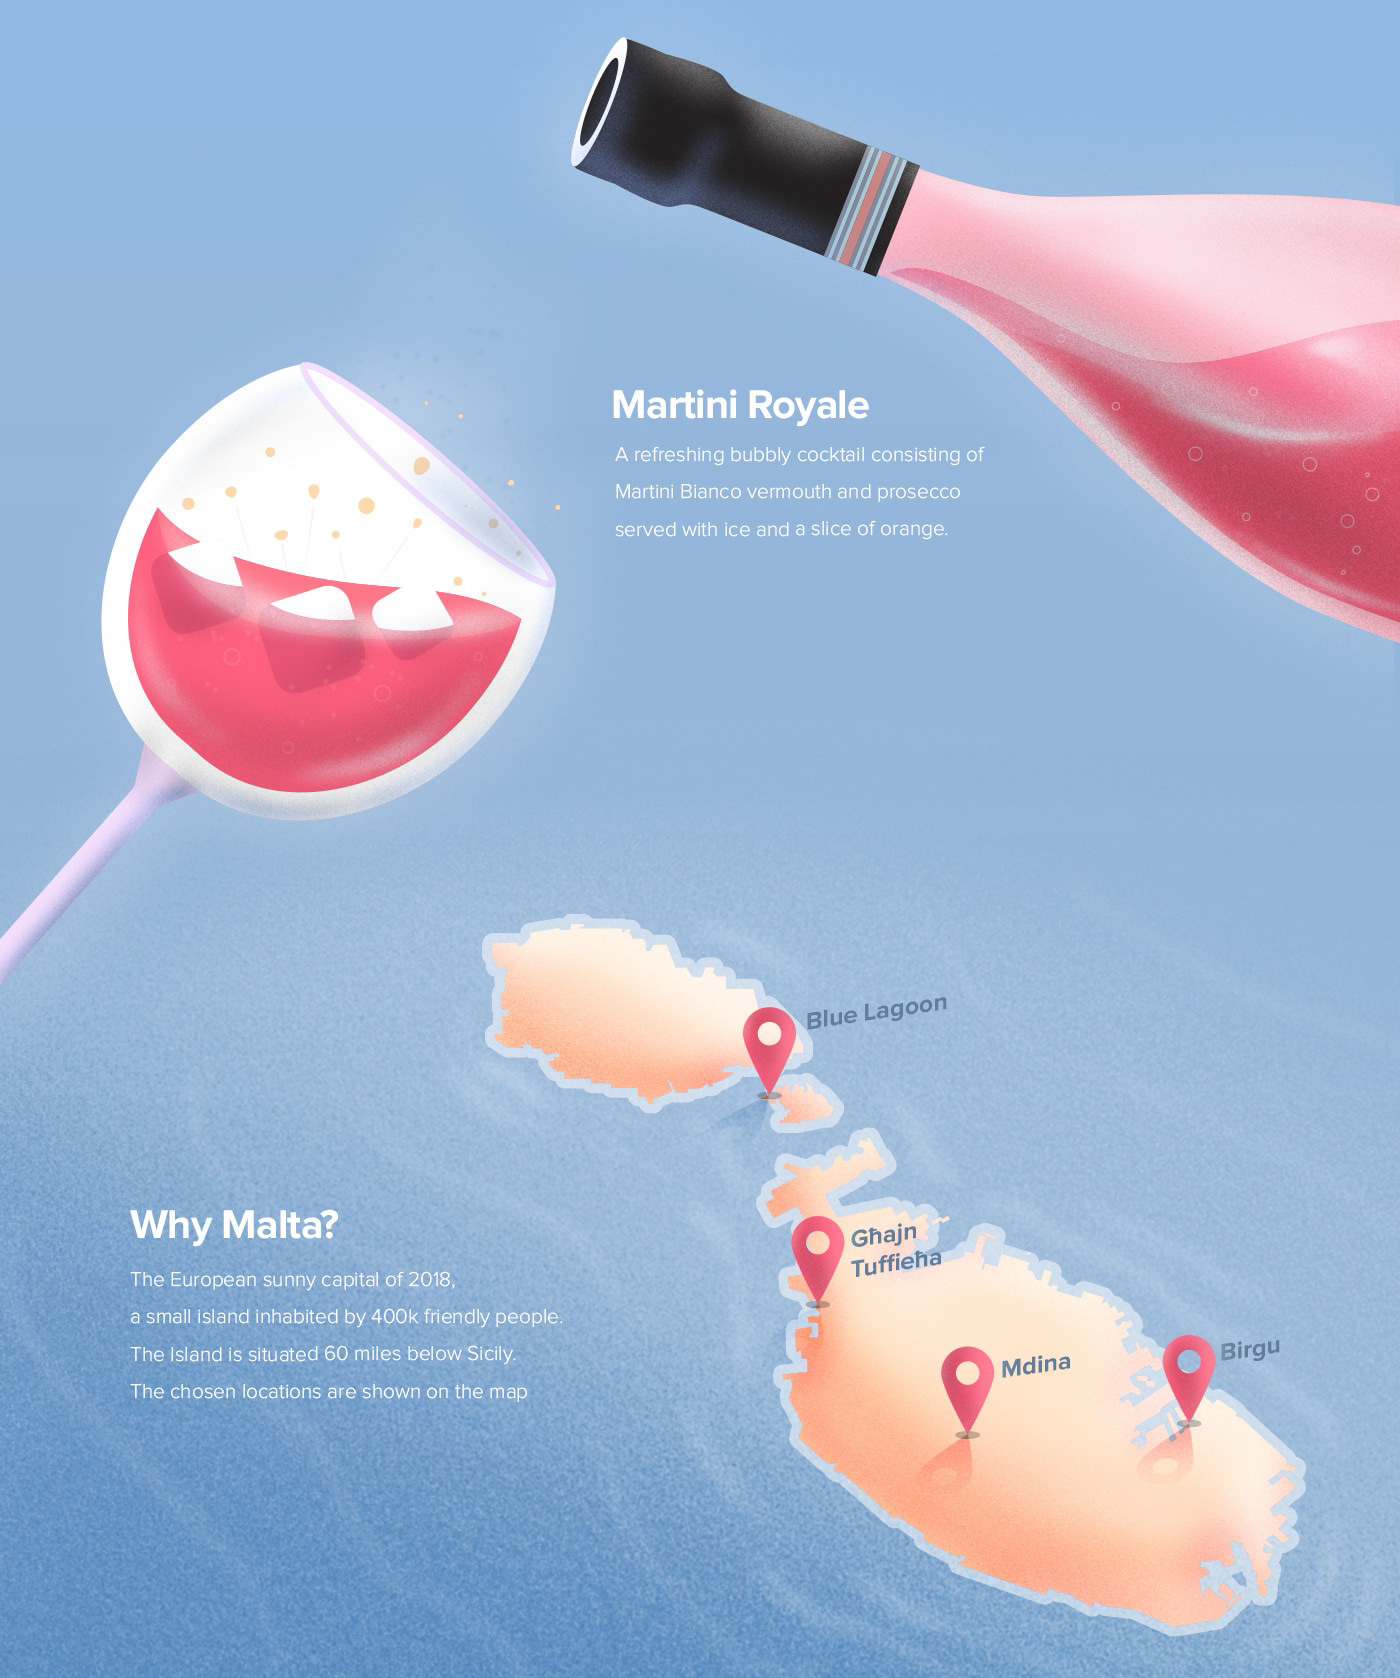 Illustrated explainer of Martini Royale and Malta